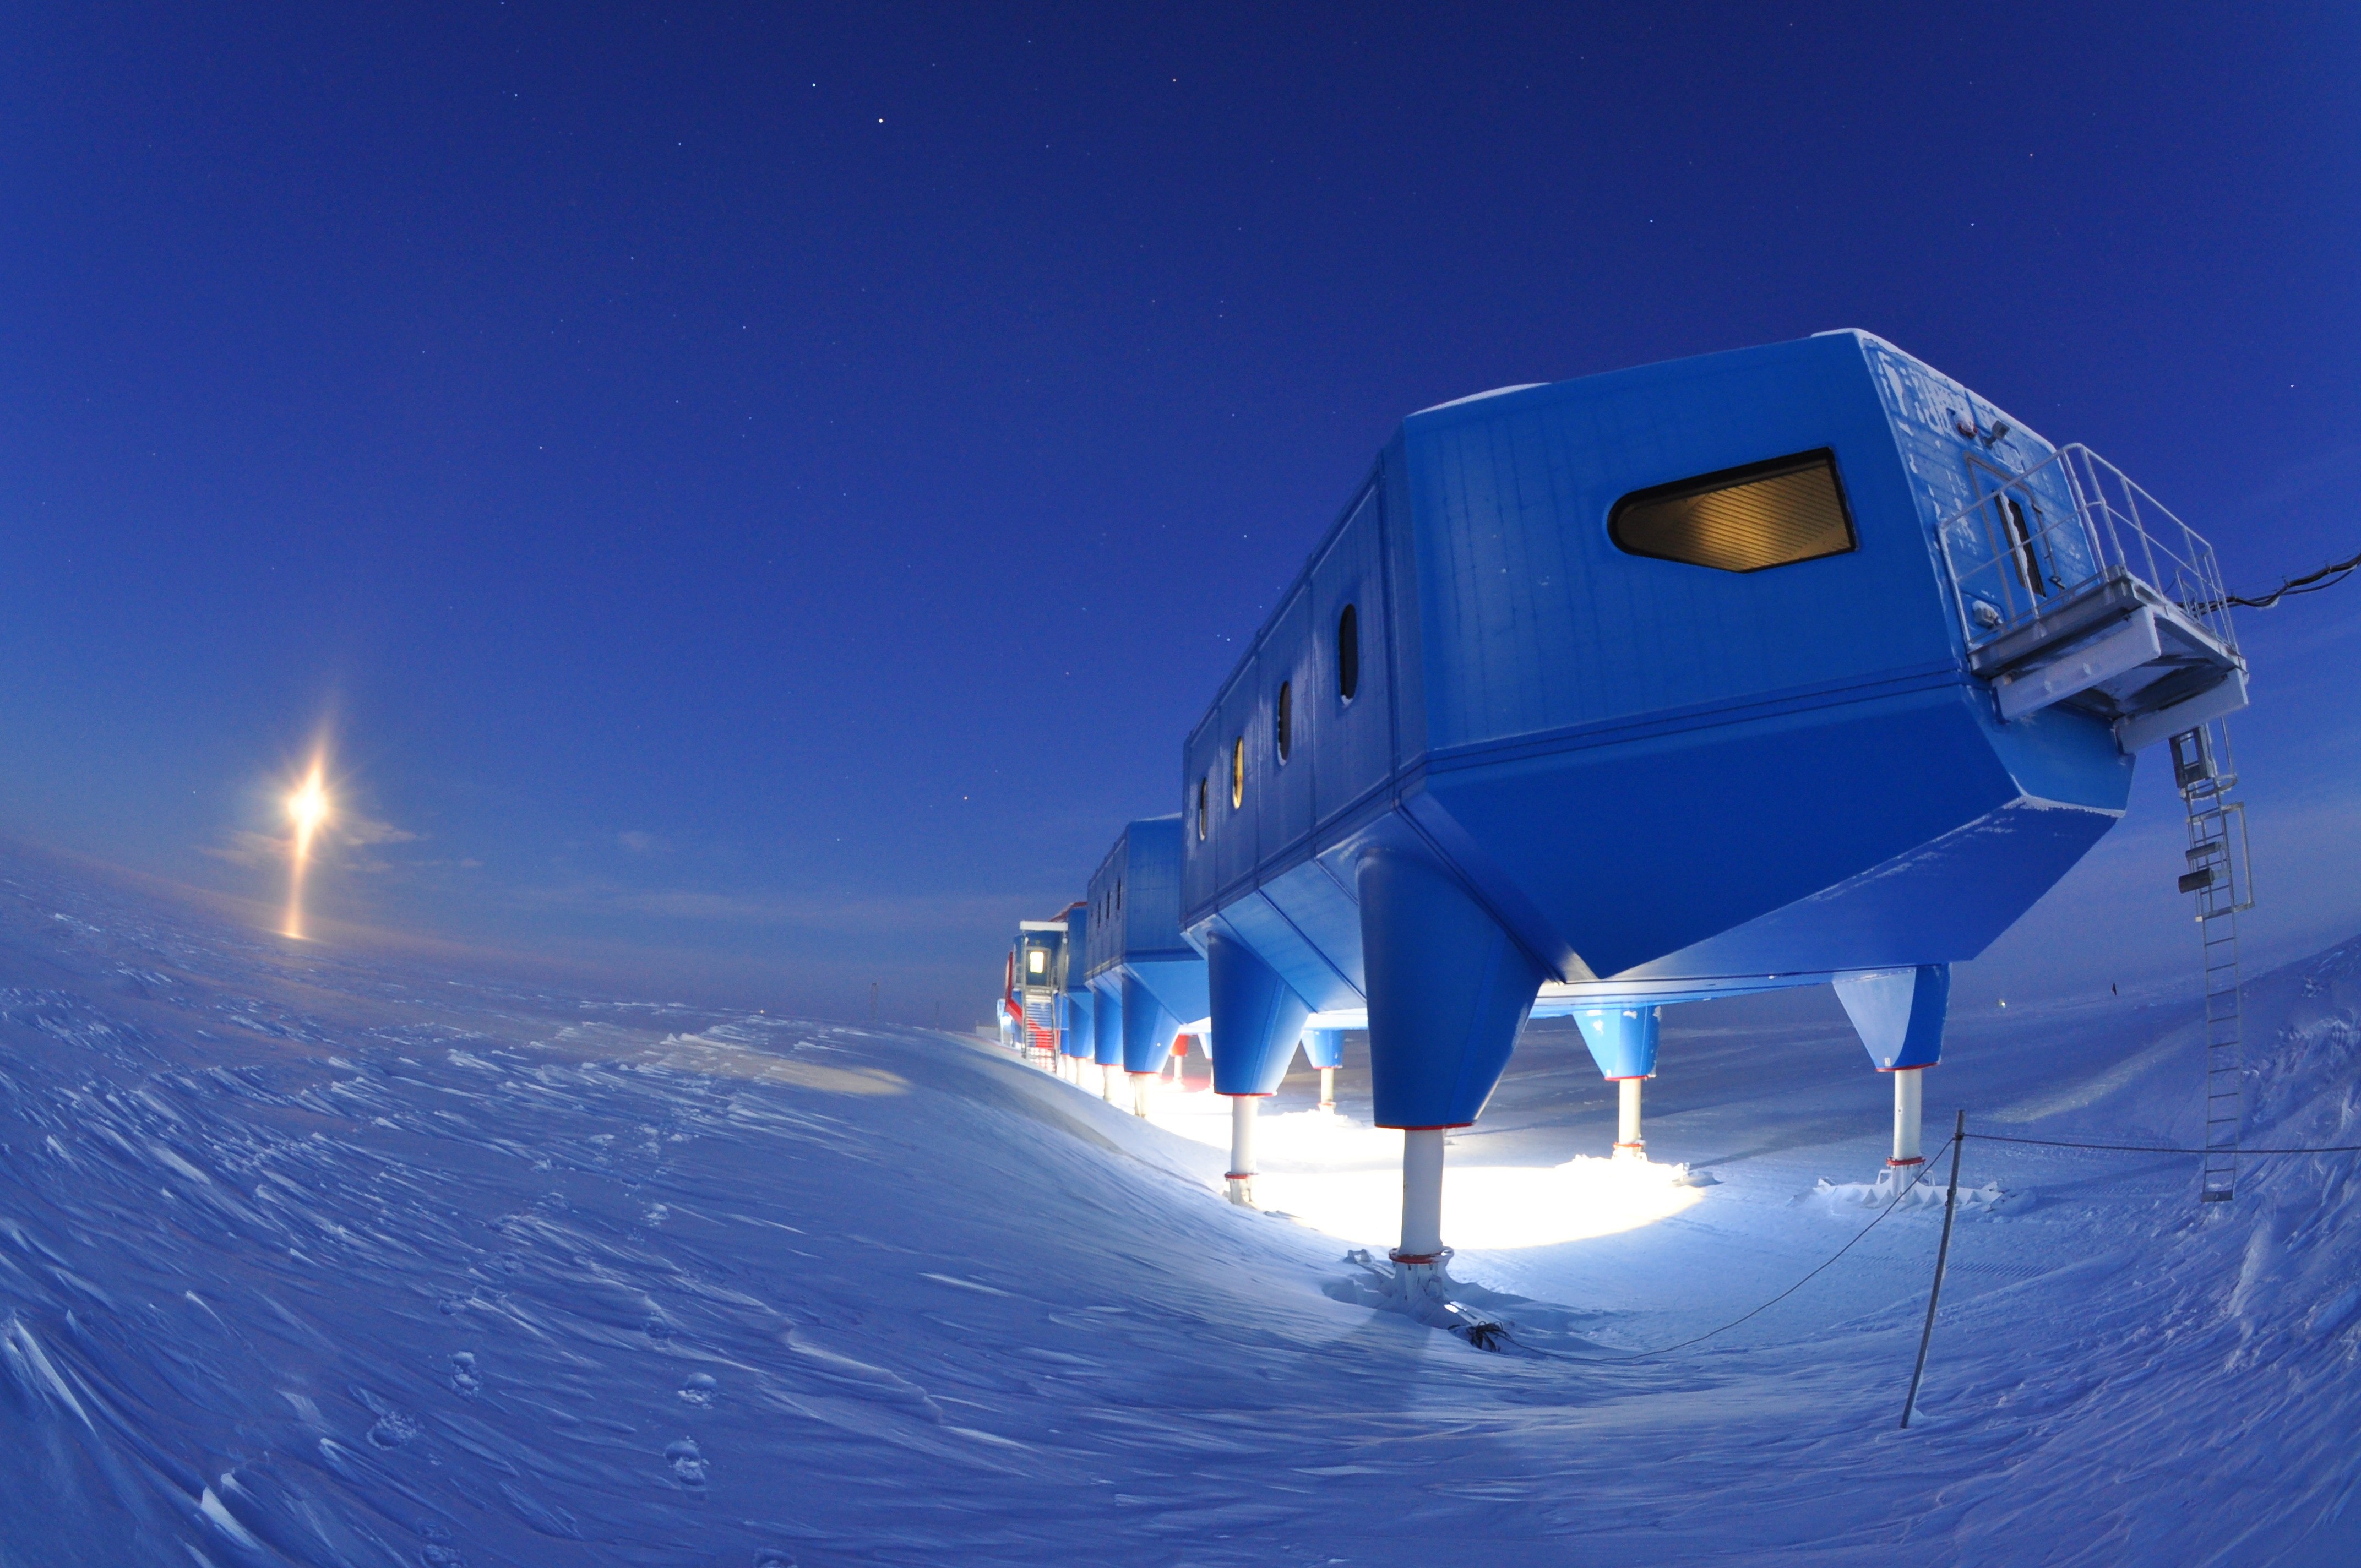 Nature Landscape Concordia Research Station Antarctica Snow Ice Evening Science Technology Laborator 4288x2848